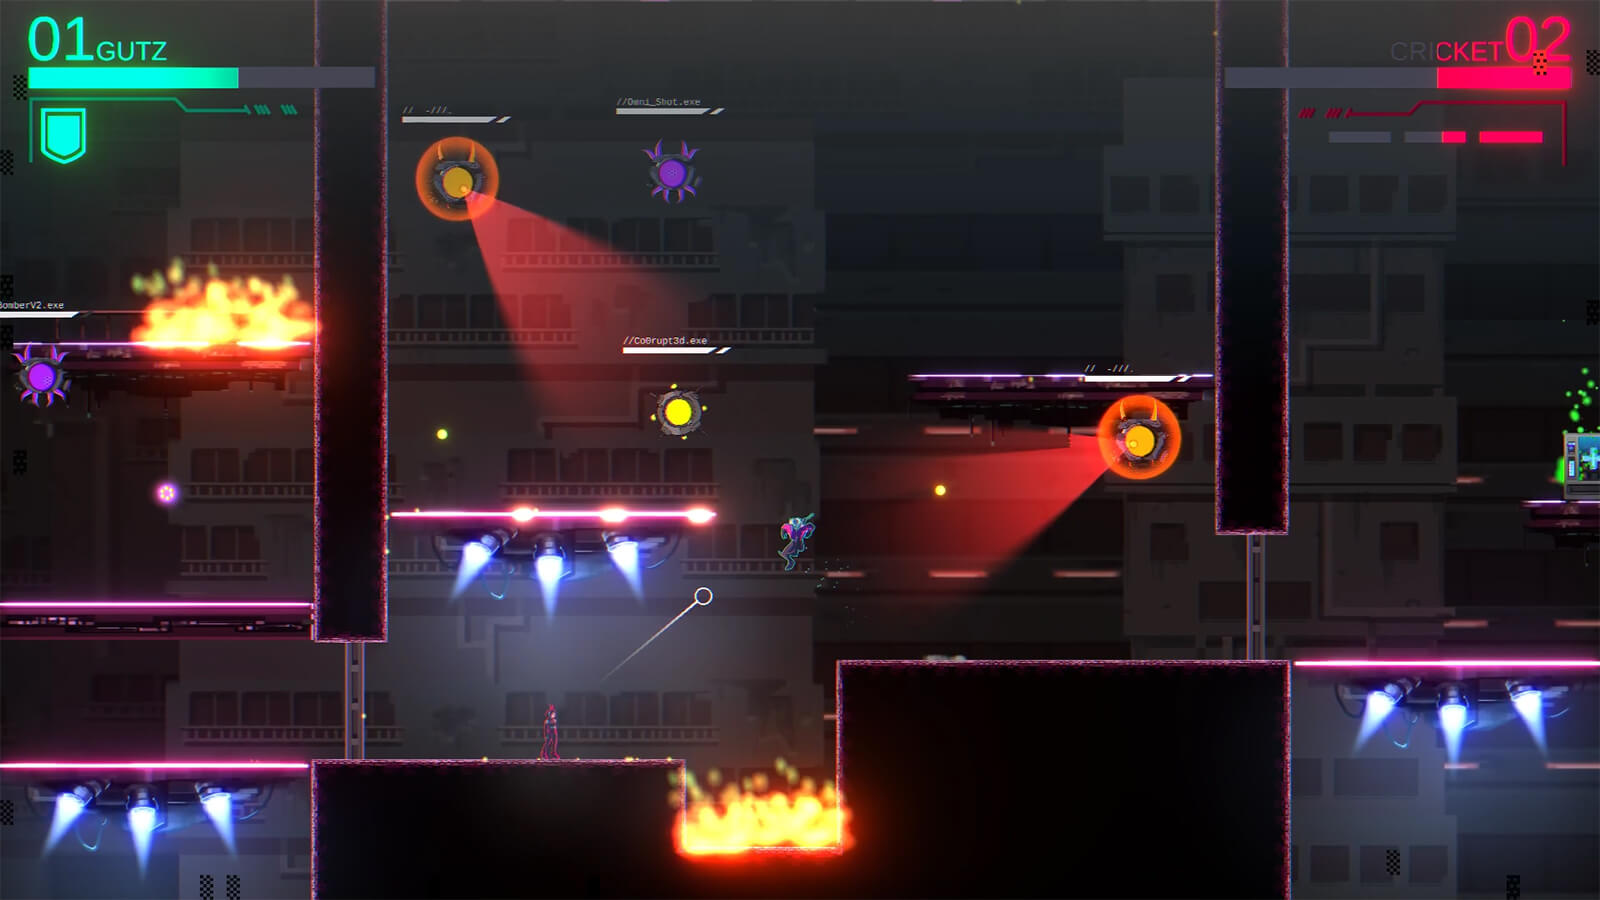 Two characters are surrounded by multi-colored drone enemies as the male character jumps over a pit of flames.